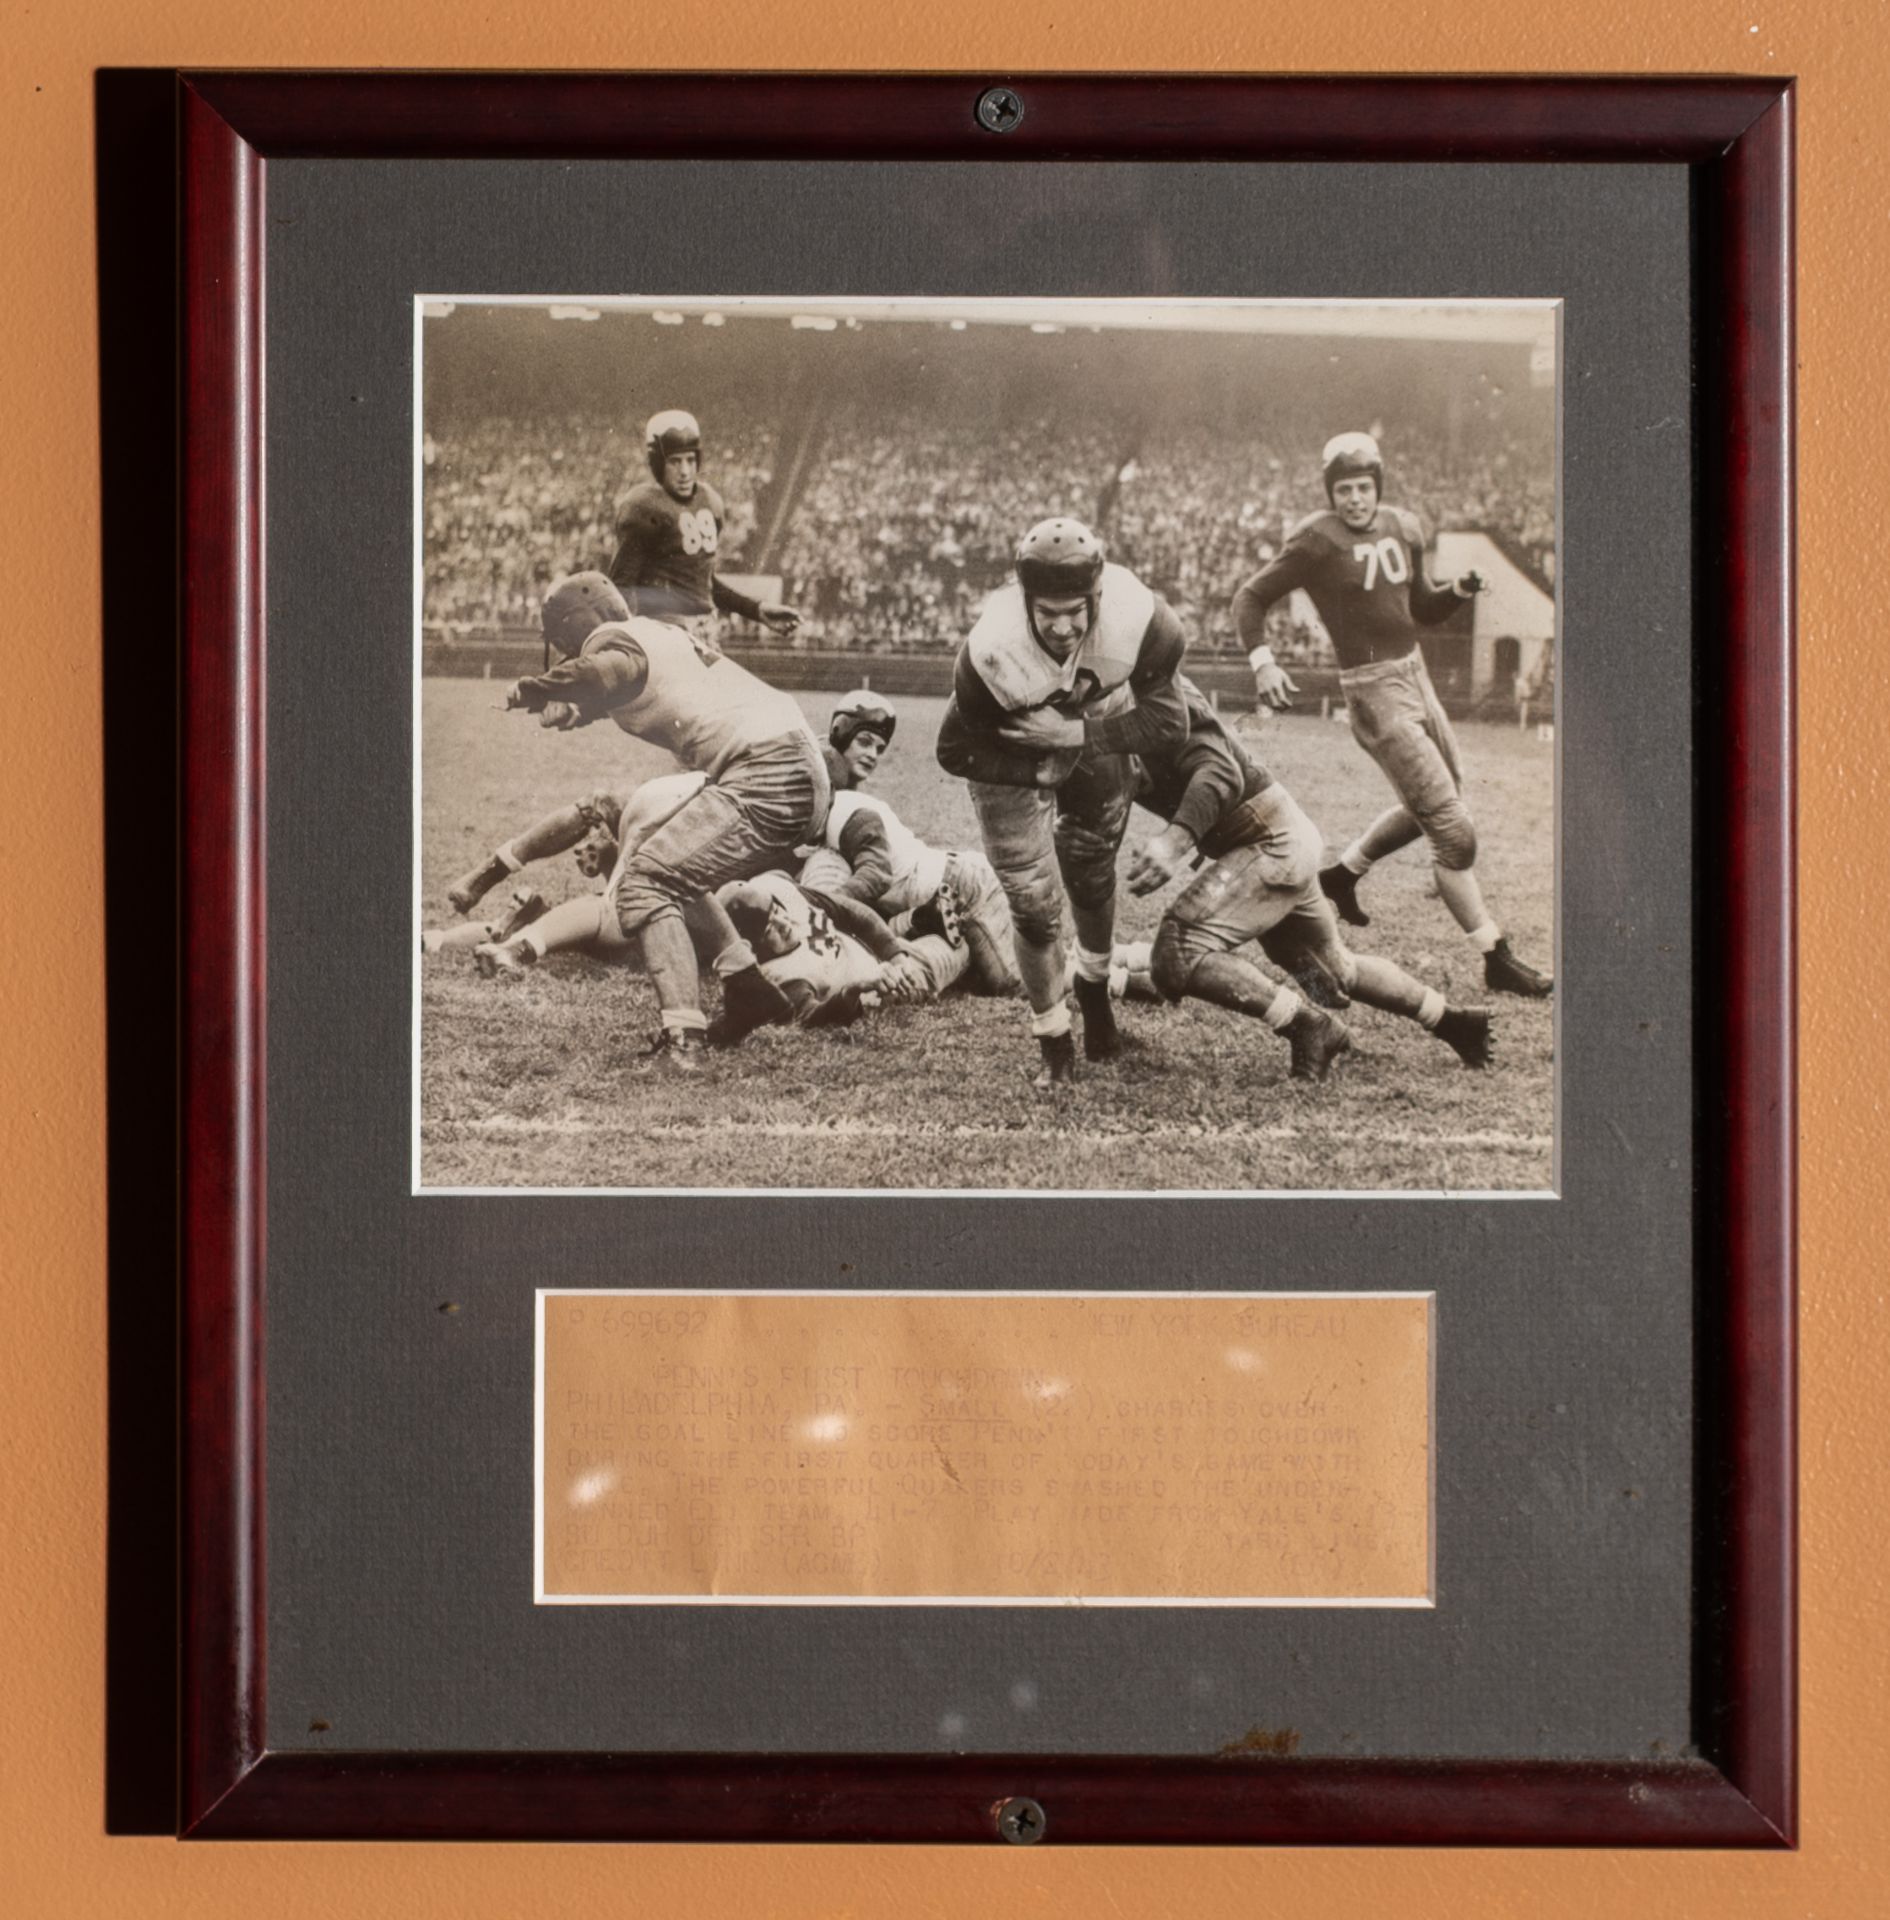 1923 Penn Yale First Touchdown In Game Framed Photo 11.5"x12.5"